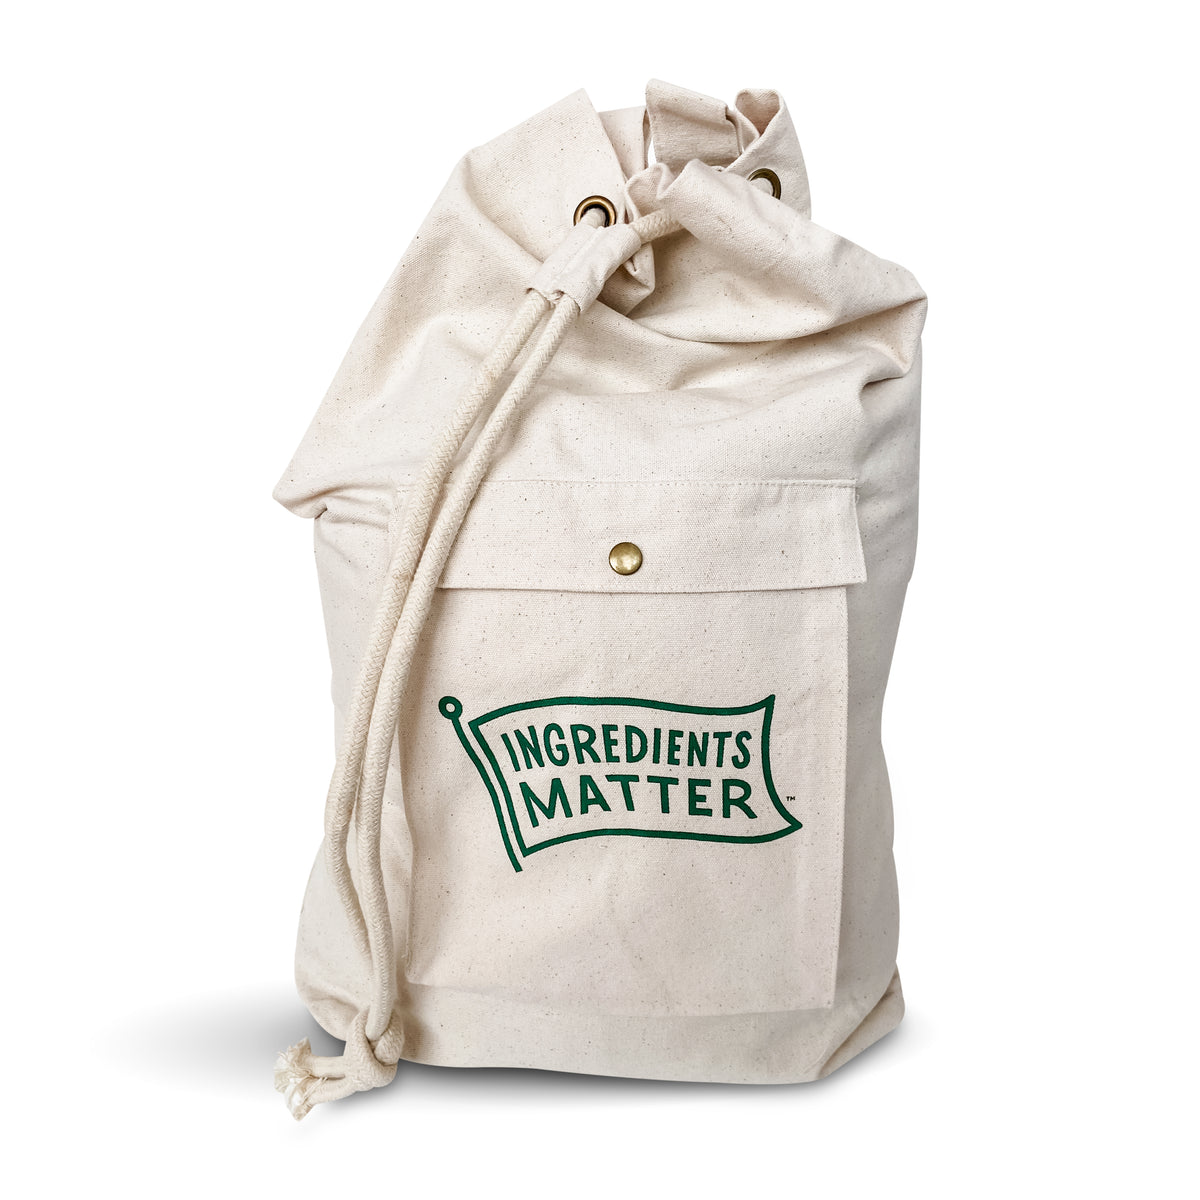 canvas laundry bag with Ingredients Matter logo and draw string